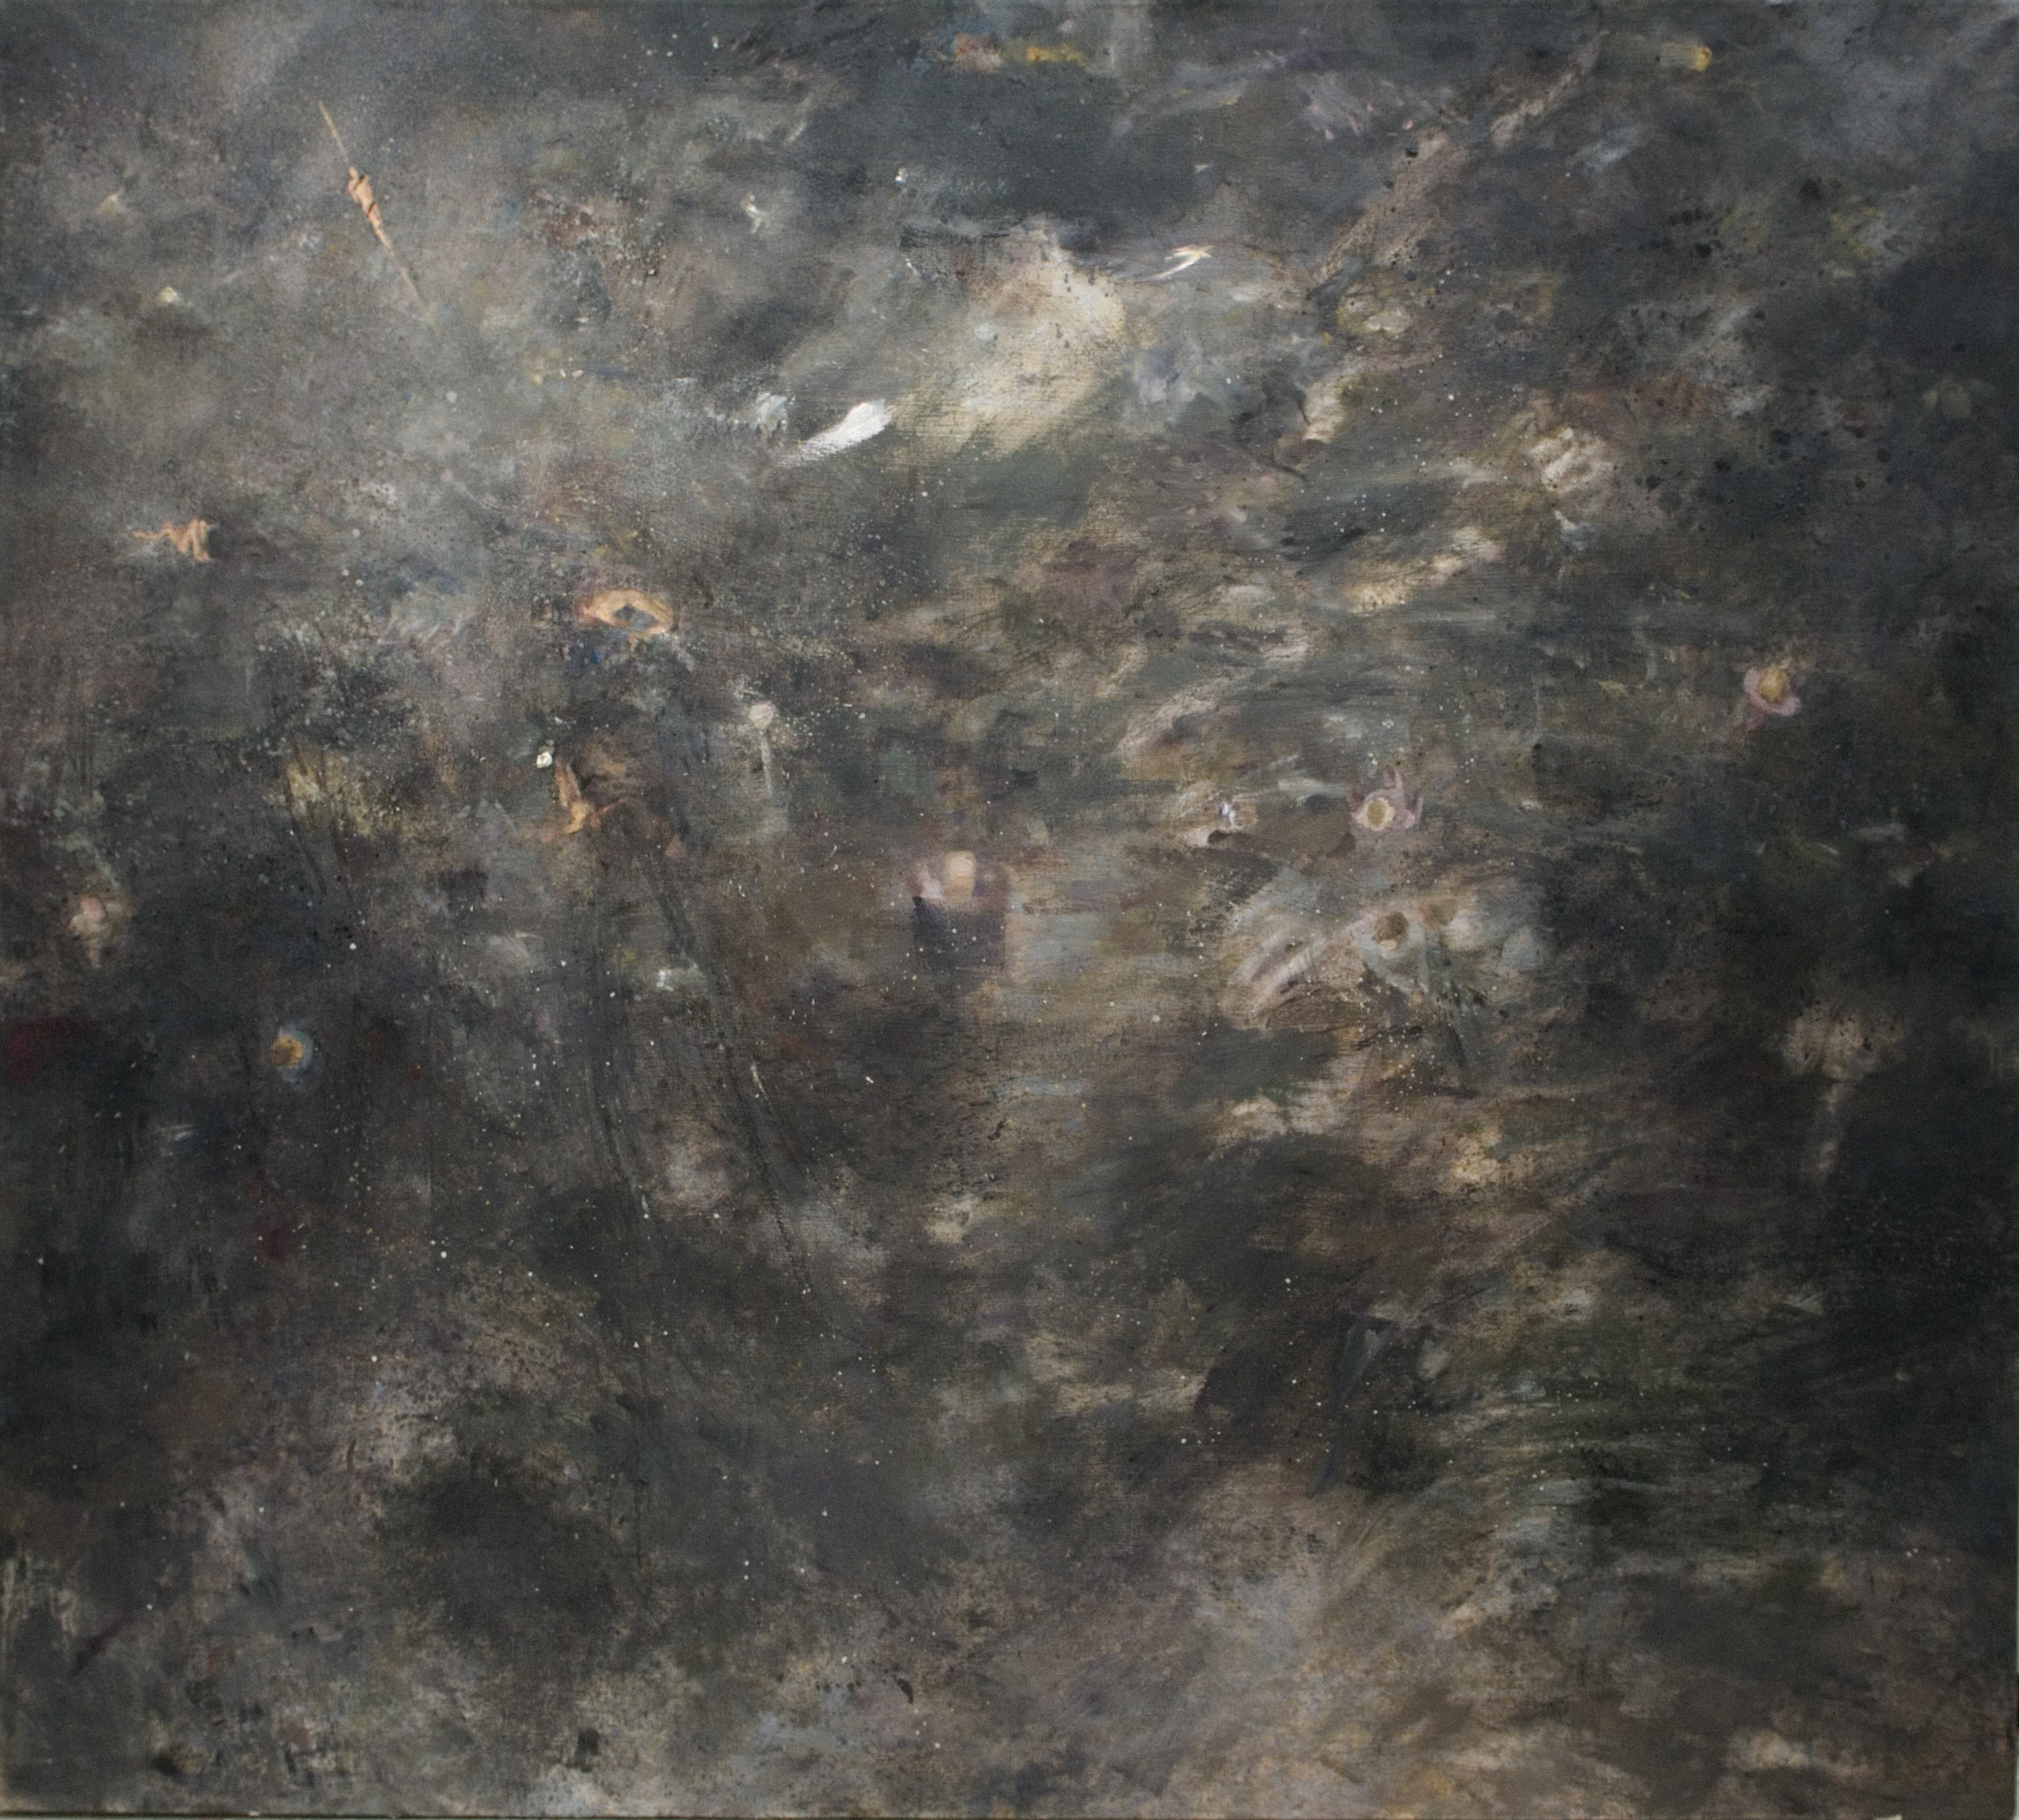 Isis, 2008, oil on canvas, 170 x 190 cm